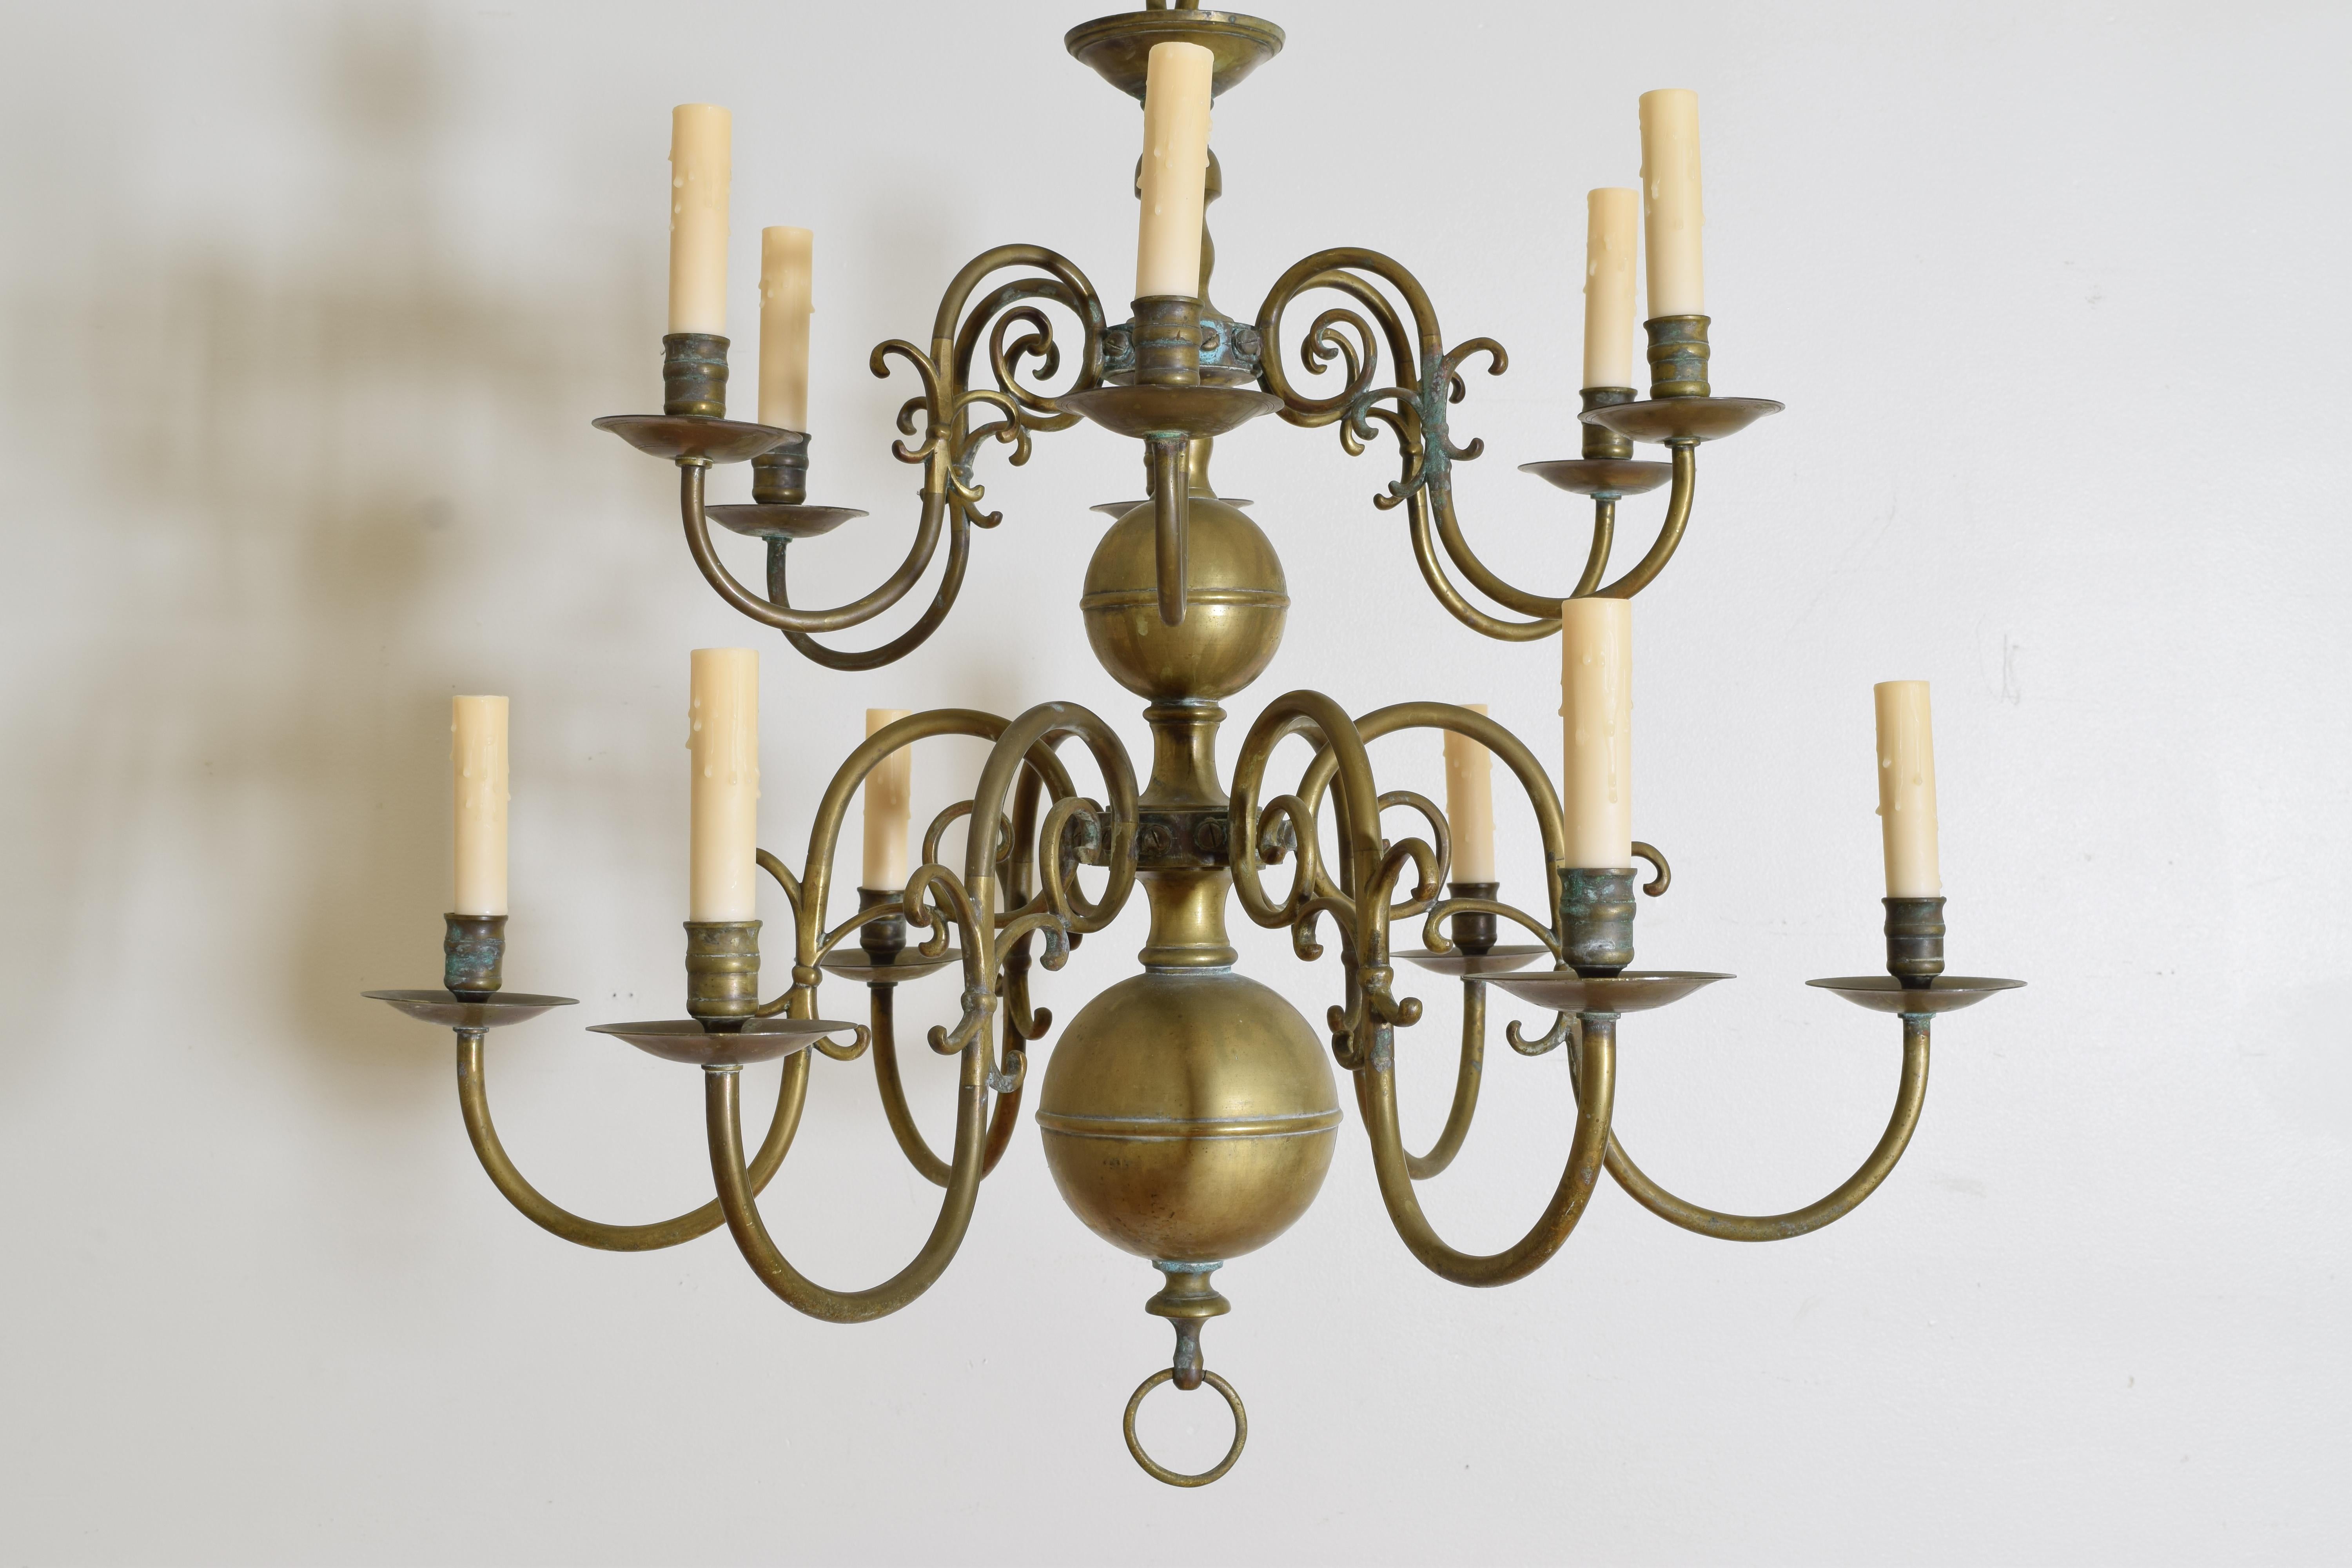 European Dutch or French Patinated Brass 2-Tier 12-Light Chandelier, 2nd half 19th cen. For Sale